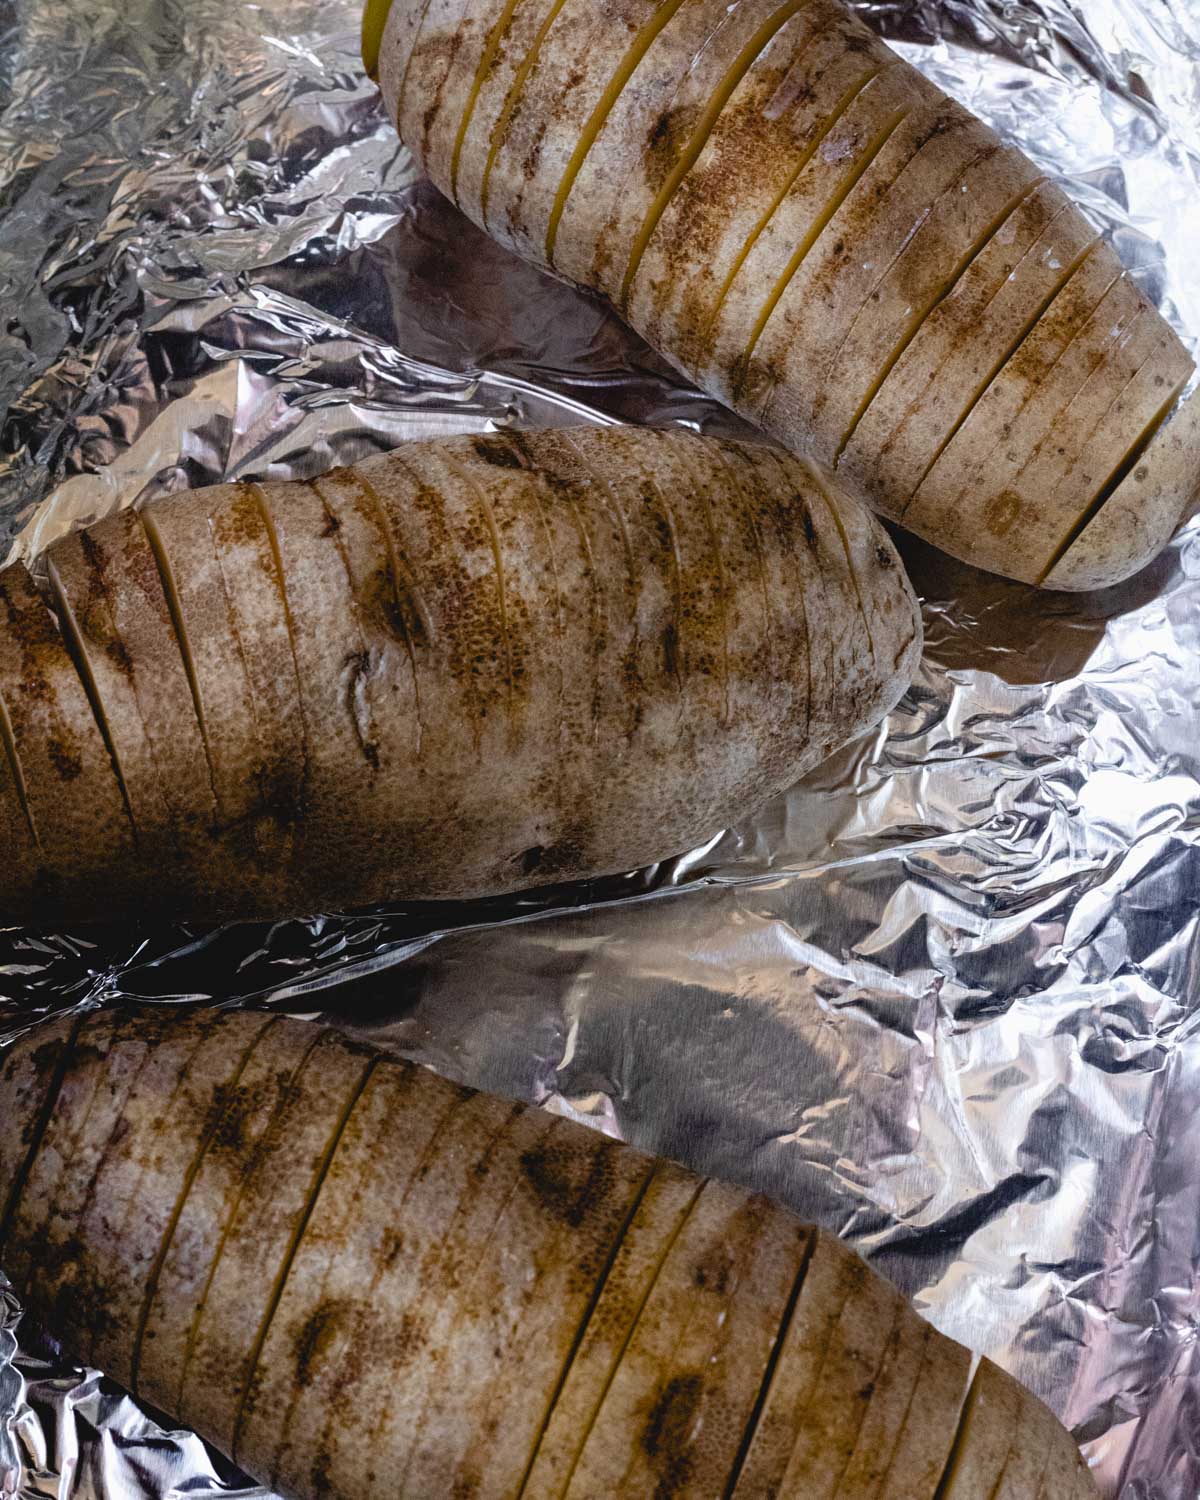 3 sliced potatoes in a foil-lined baking dish.